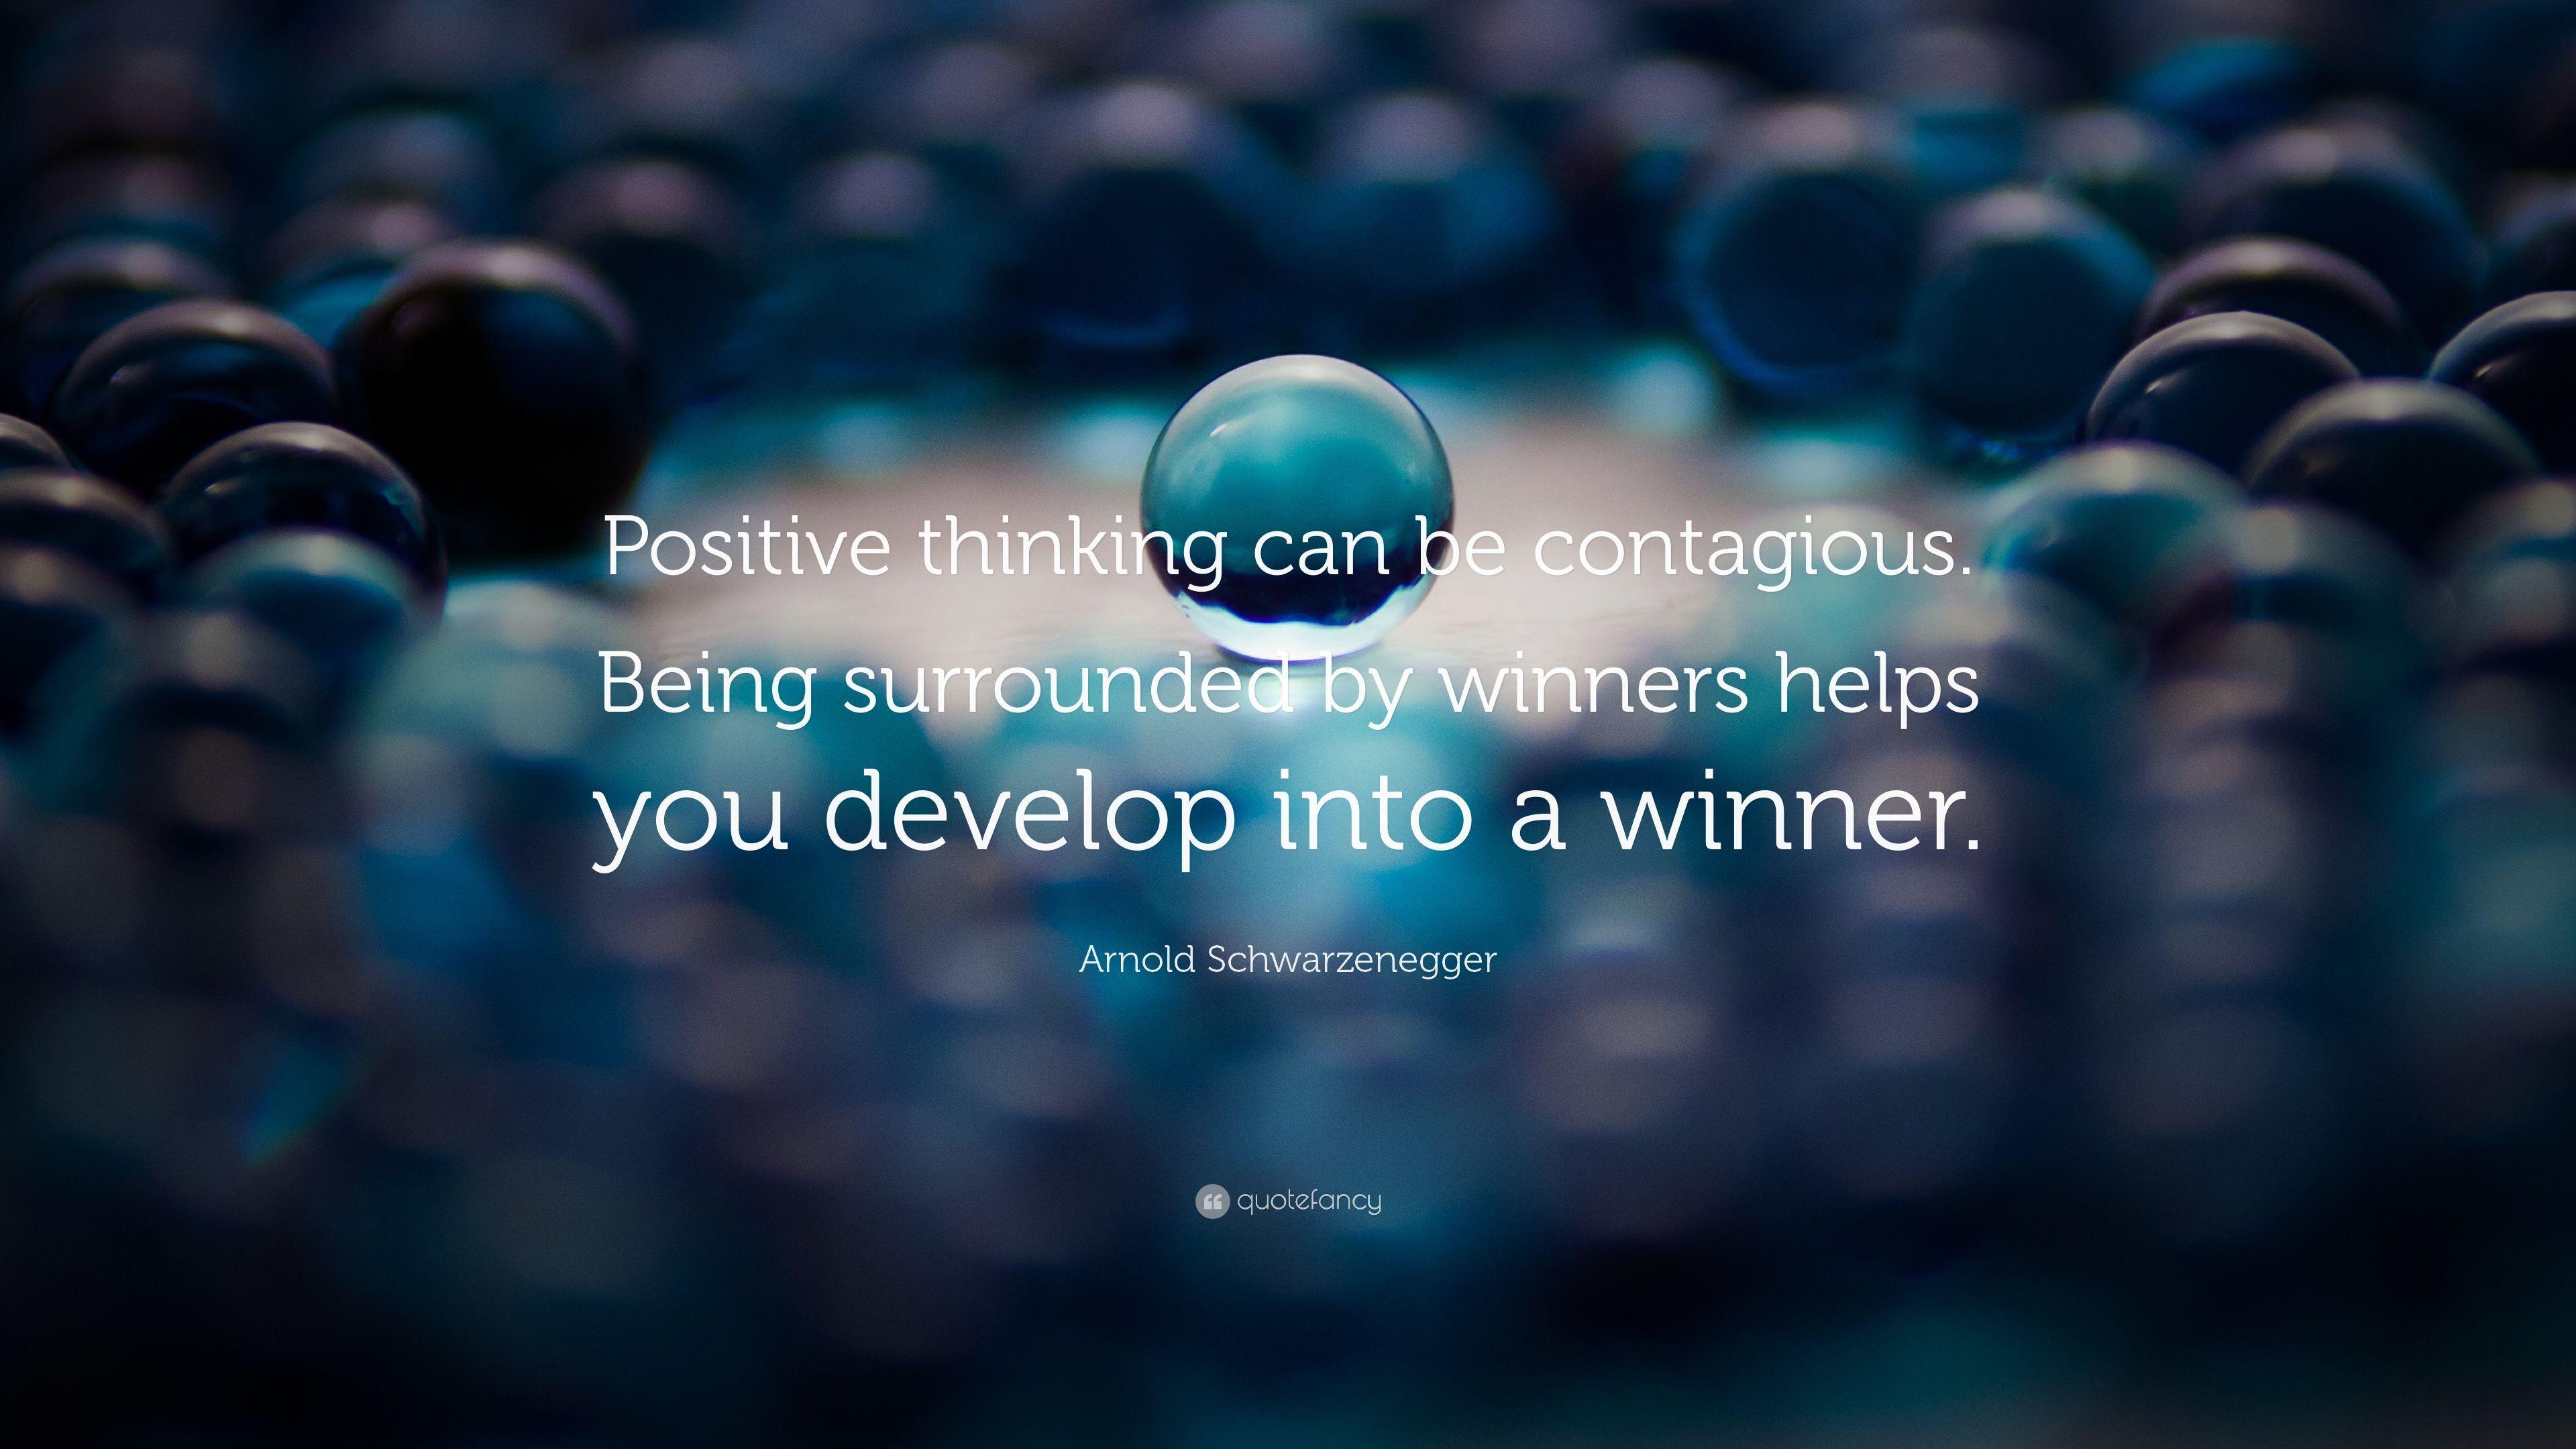 Arnold Schwarzenegger Quote: “Positive thinking can be